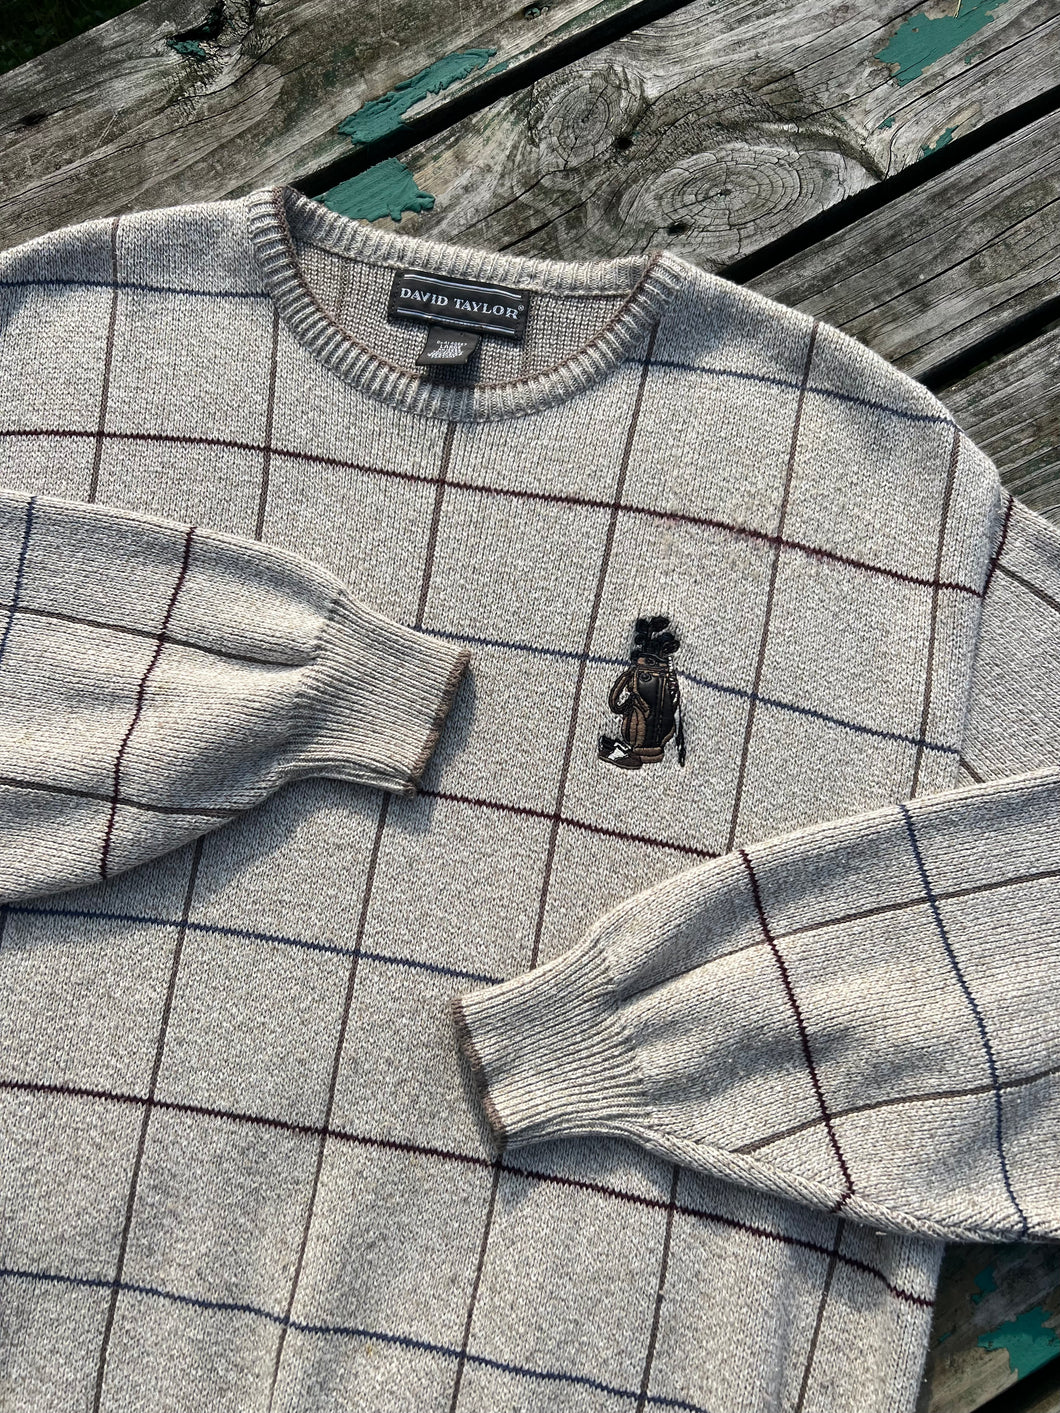 Vintage Golf Embroidered Sweater (L)